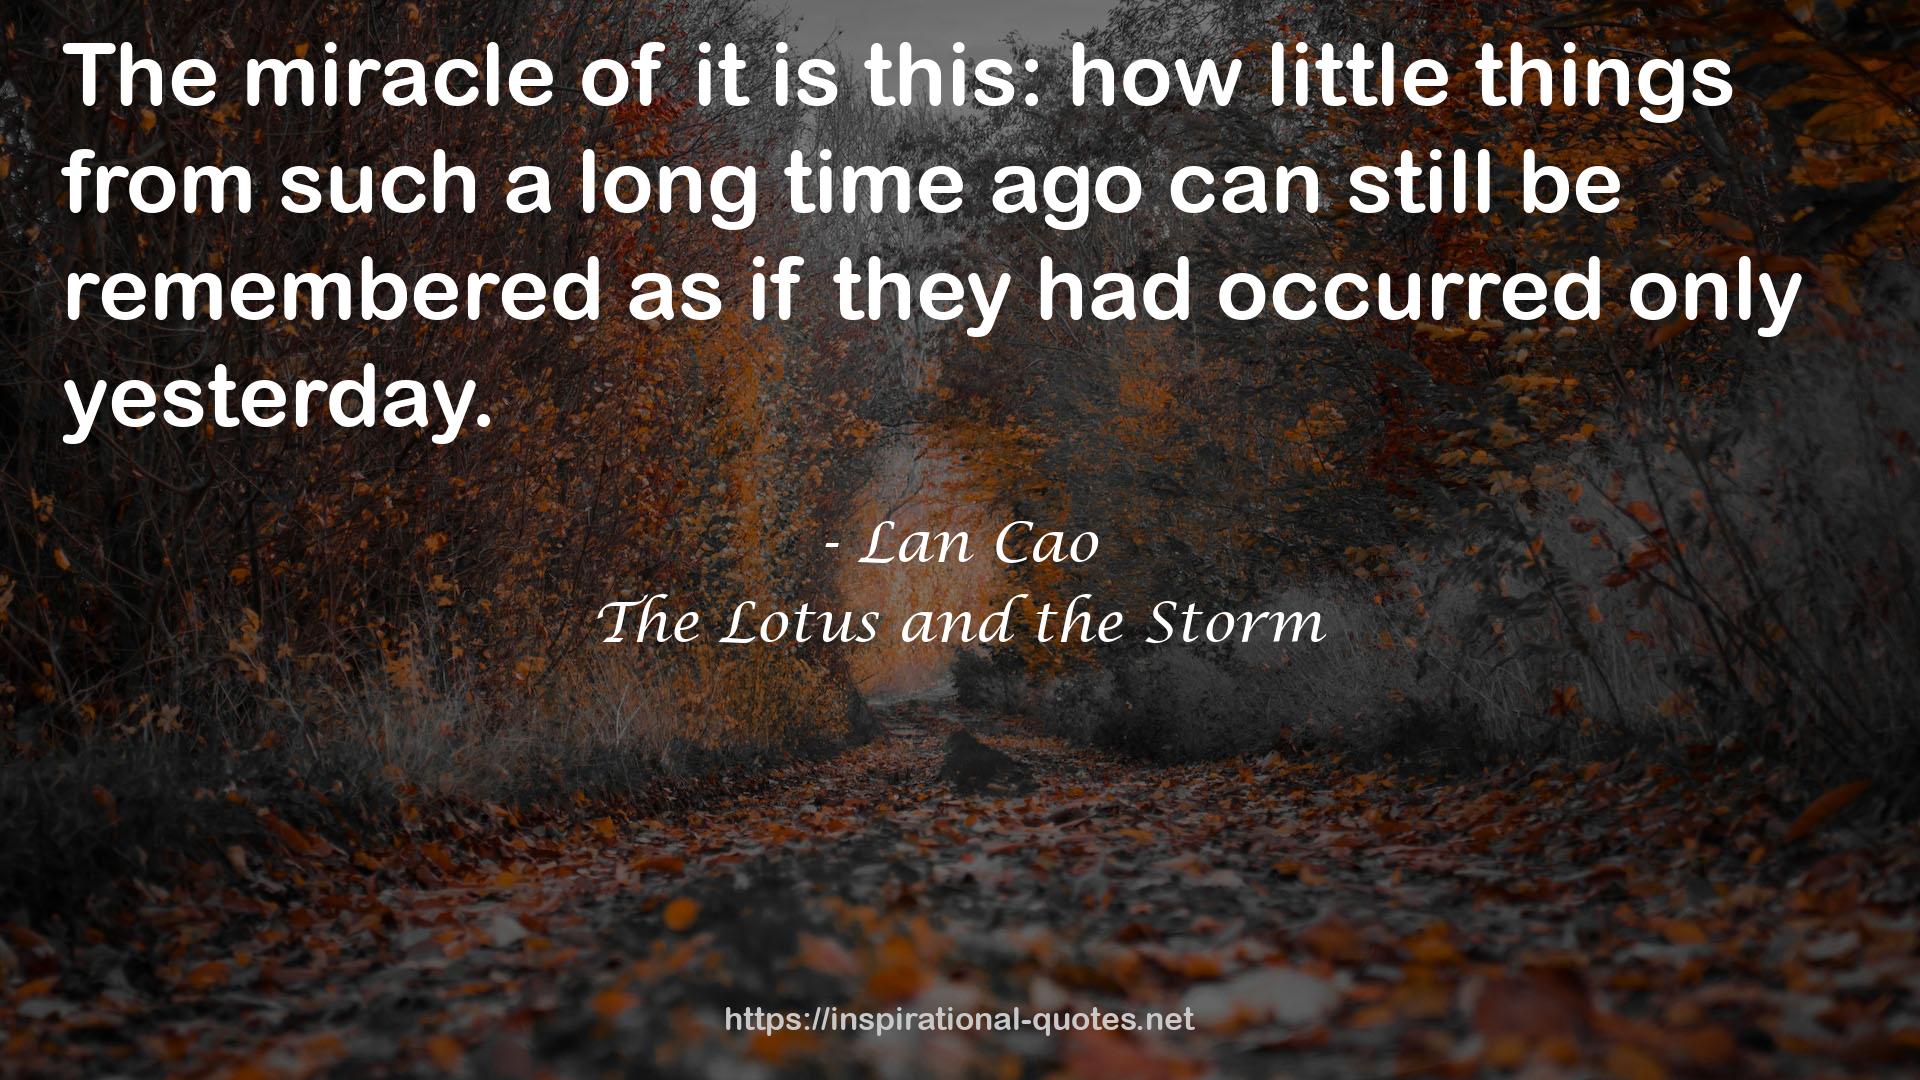 The Lotus and the Storm QUOTES